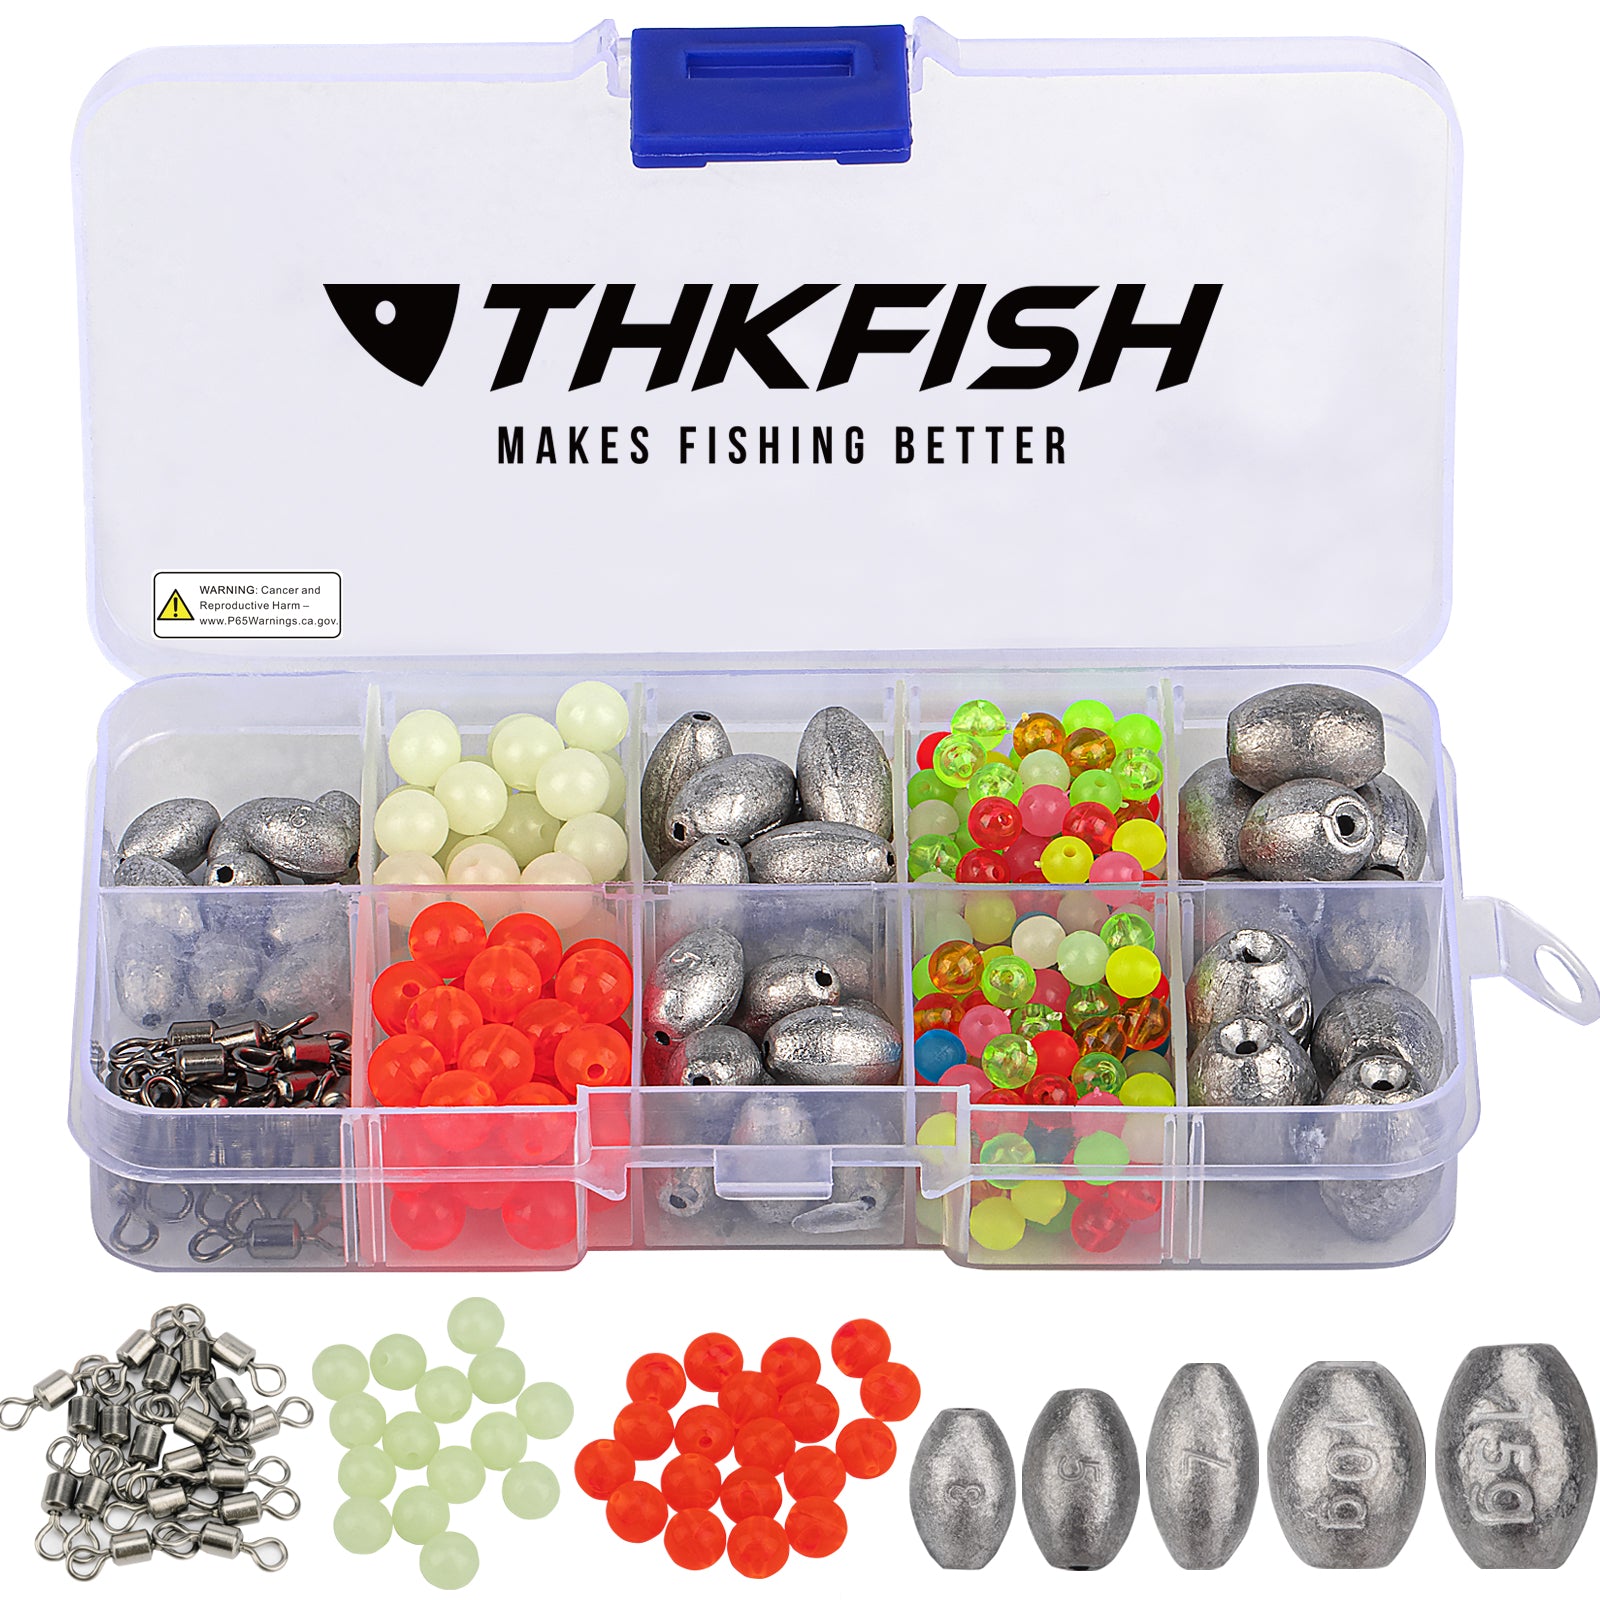 Bullet Weights NO ROLL SINKER! A Weight You MUST HAVE for FISHING